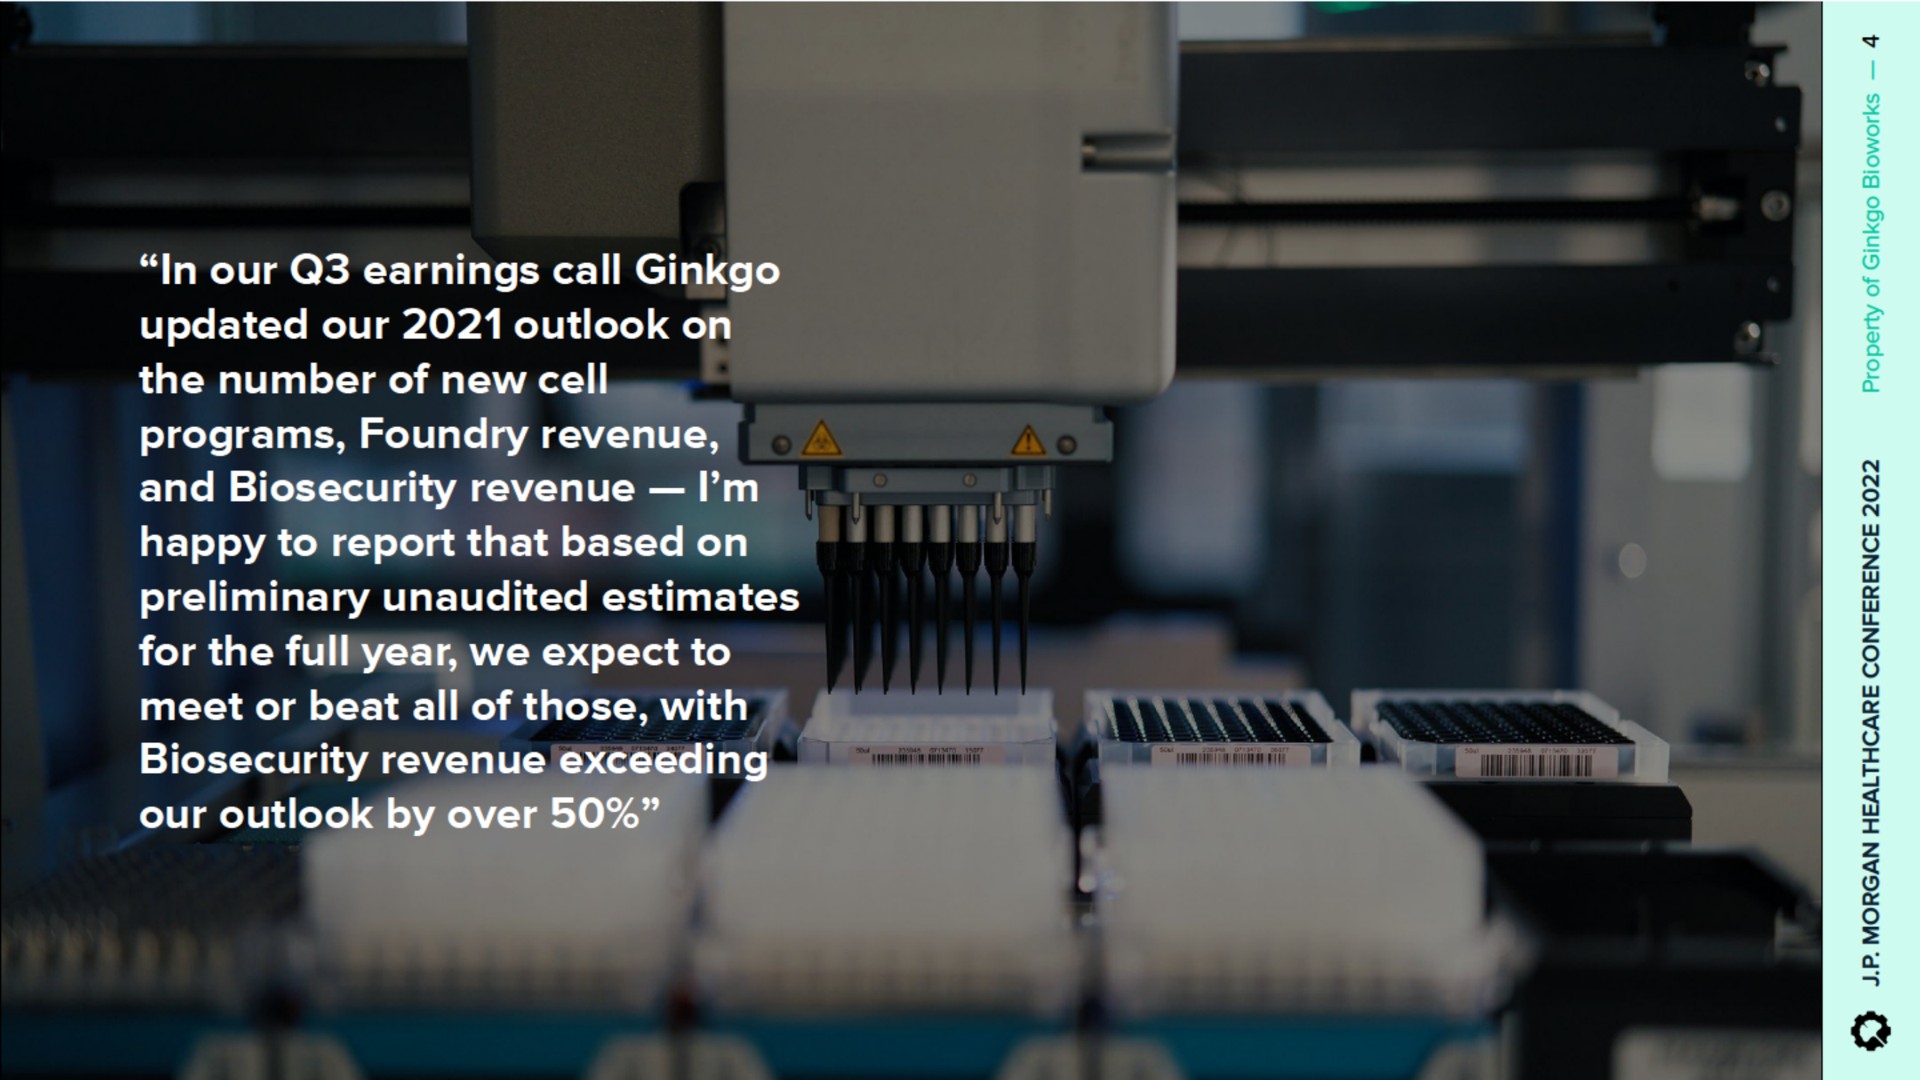 in our earnings call ginkgo updated our outlook on the number of new cell programs foundry revenue and revenue i happy to report that based on preliminary unaudited estimates for the full year we expect to revenue exceeding our outlook by over | Ginkgo